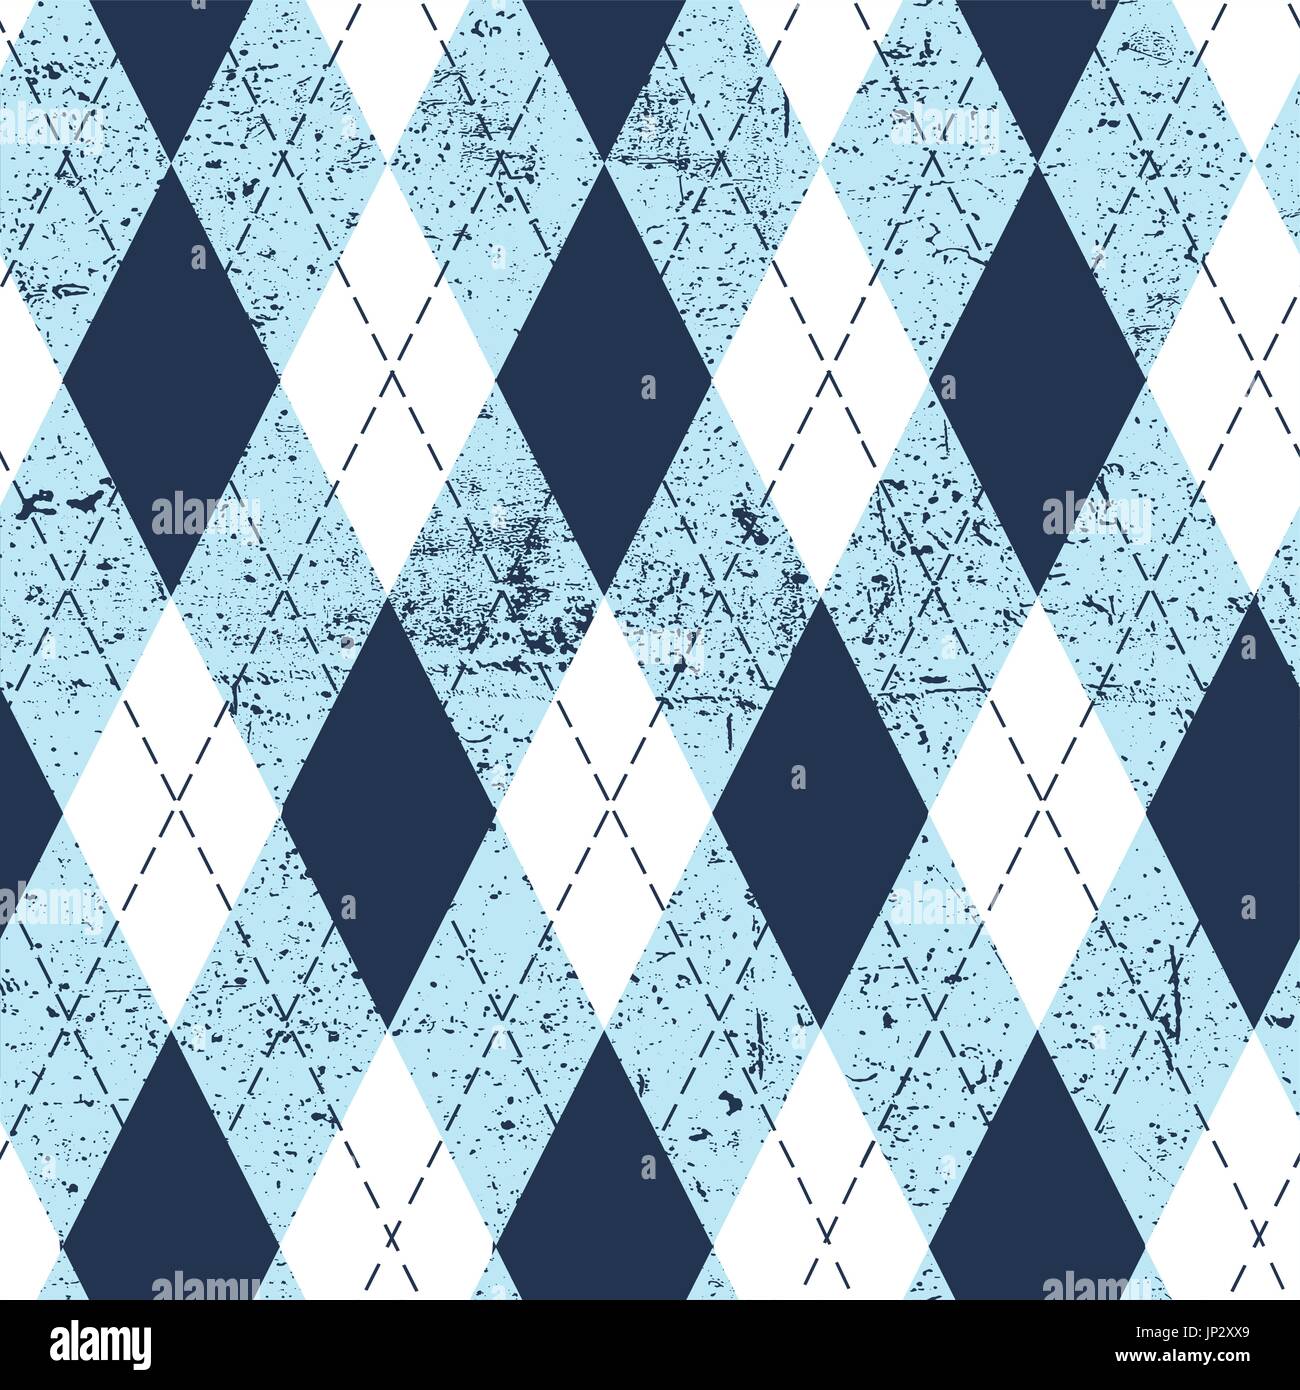 Seamless argyle aged pattern. Traditional diamond check print in moderate blue, soft blue and white with black stitch and grunge texture. Grunge vinta Stock Vector